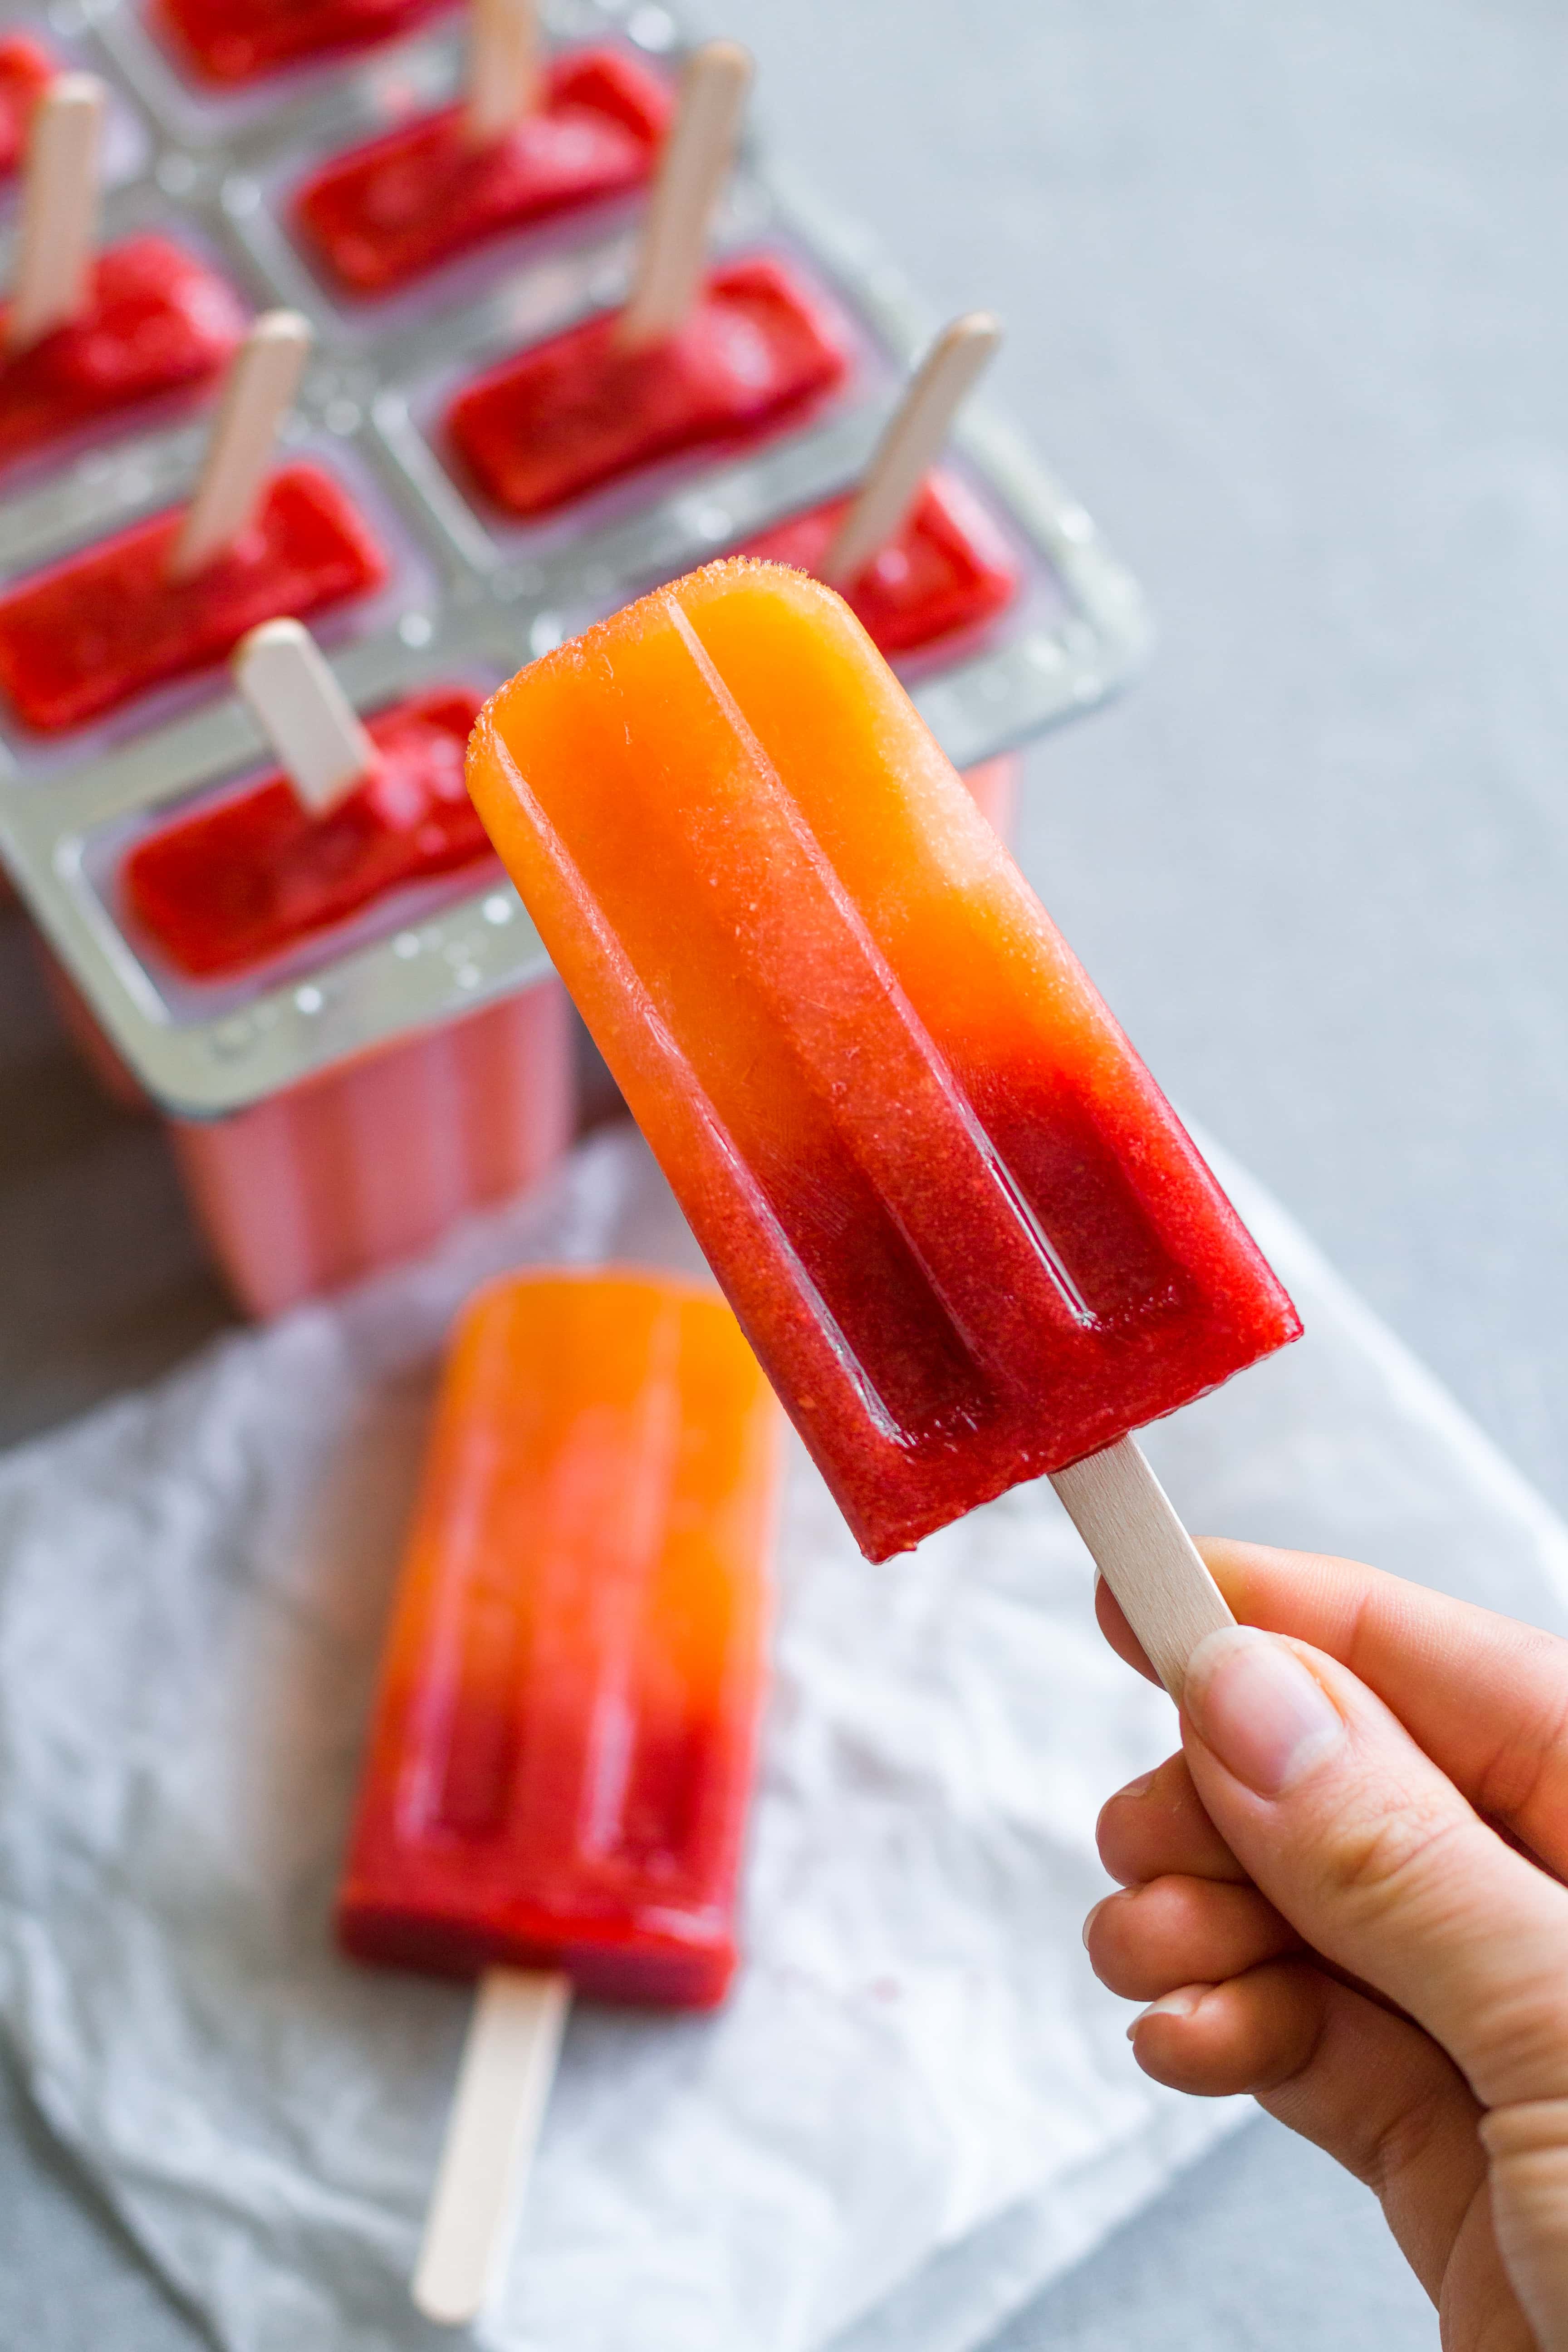 A hand holding an ombre orange and red popsicle. More popsicles blurry in the background, one on paper lying on the table and a few in a popsicle mold.